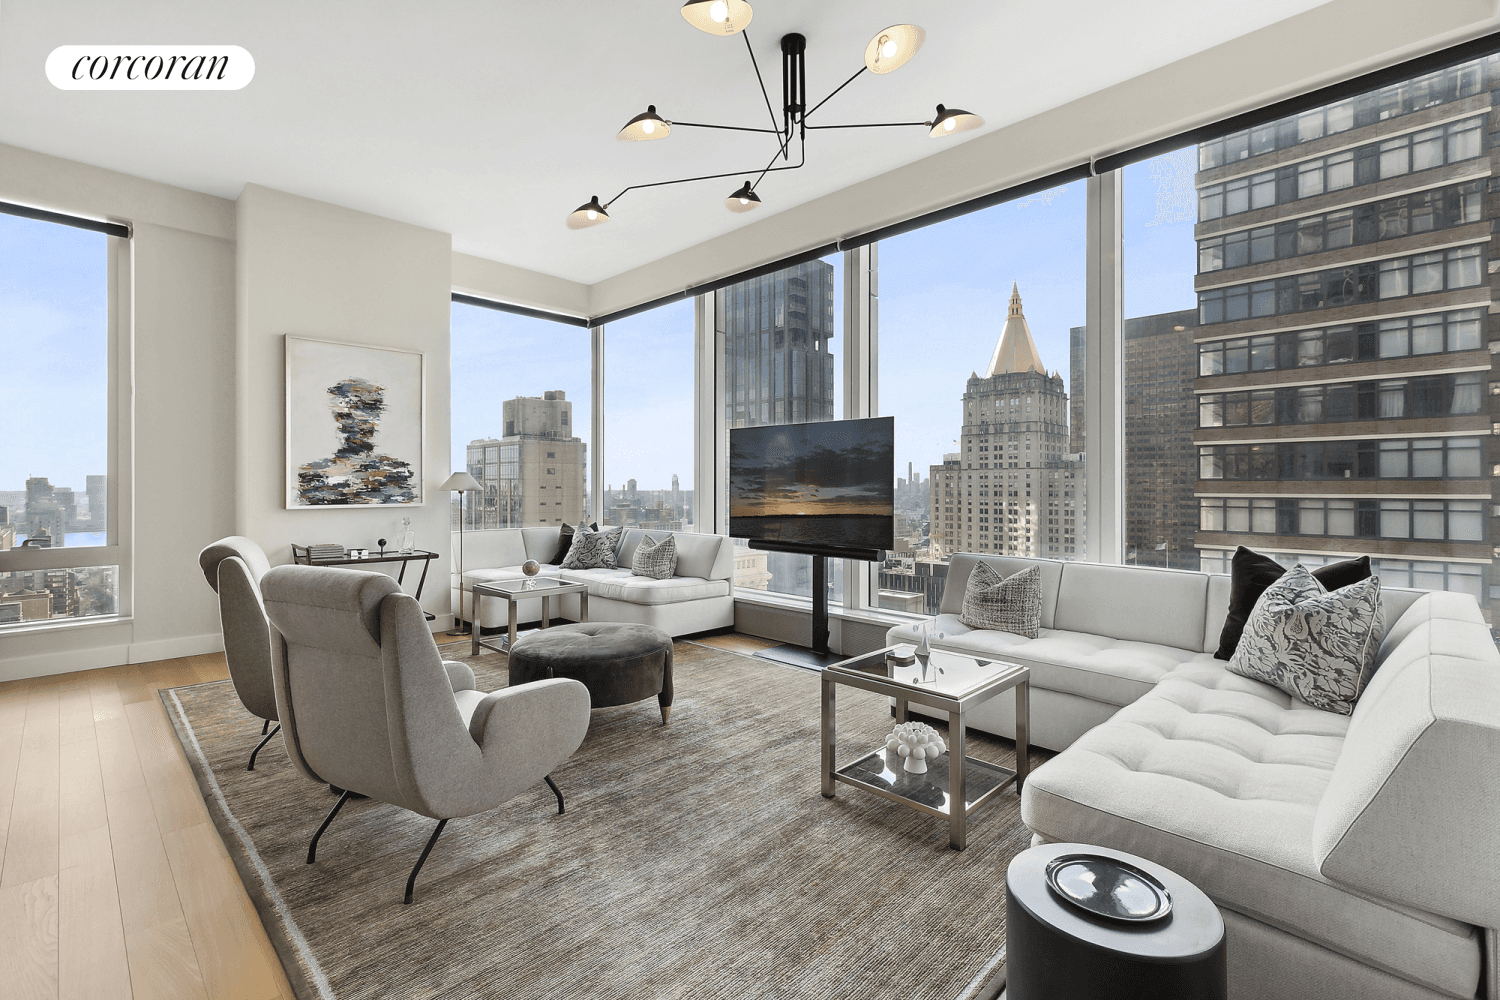 Designed by Handel Architects, Madison House sets the new standard in design and inspiration for the NYC luxury real estate market.